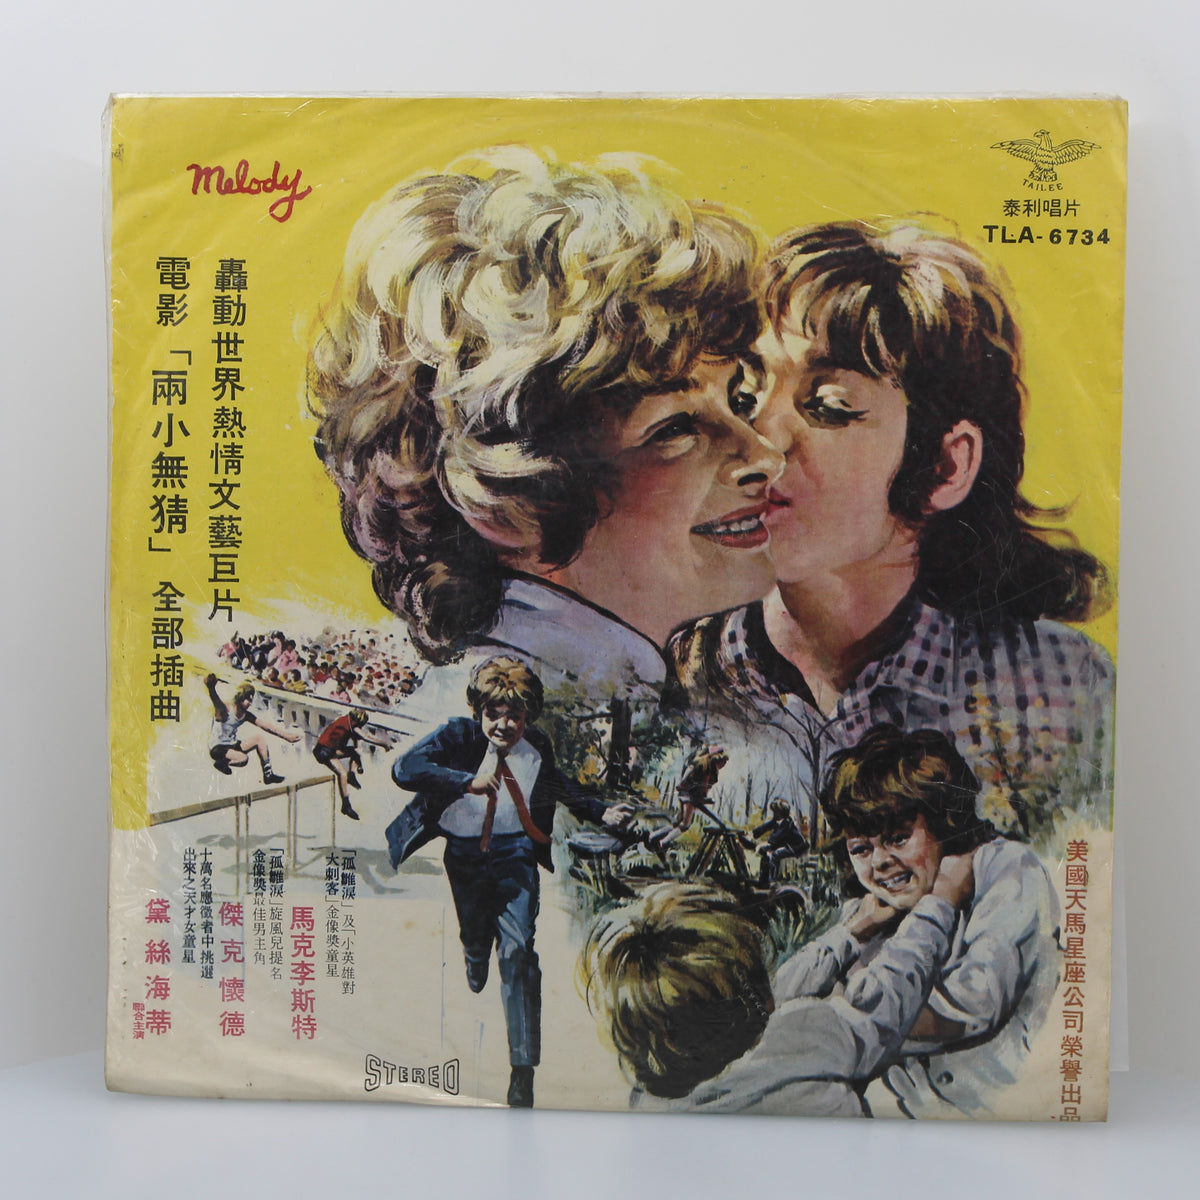 Bee Gees &amp; Various – Original Soundtrack Recording From Melody, Vinyl, LP, Album, Unofficial Release, Taiwan 1971